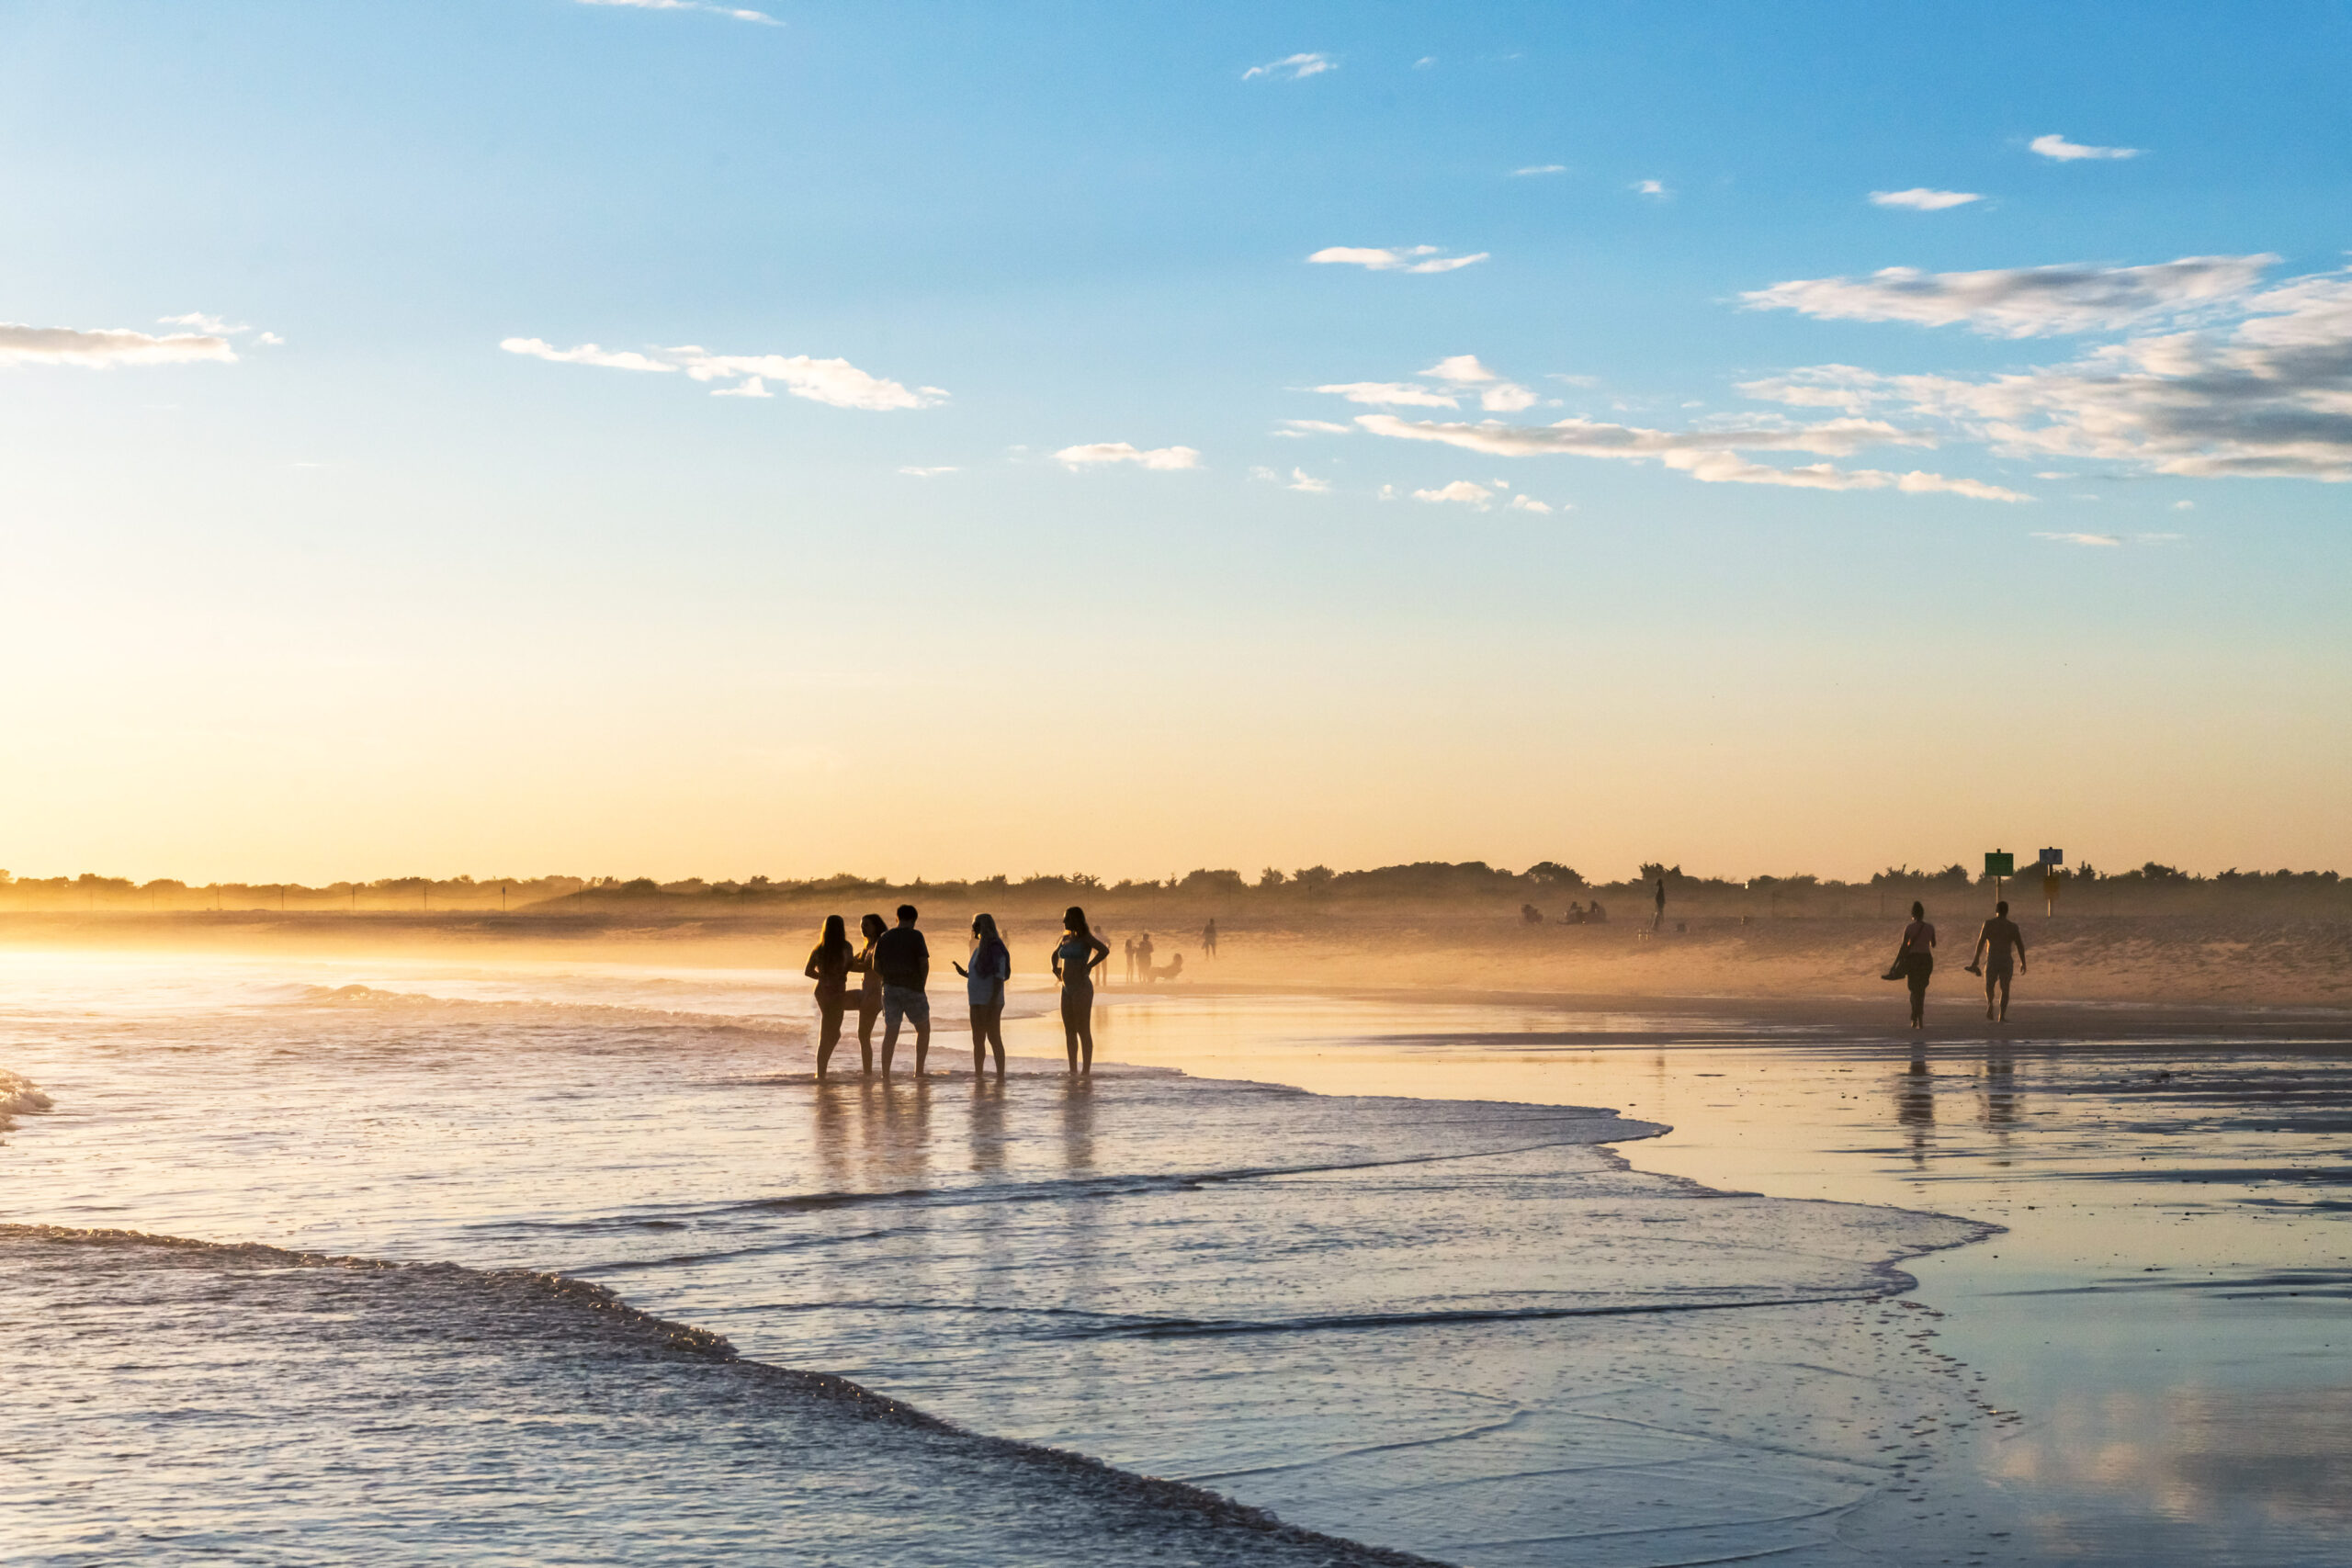 People standing at the water's edge of the ocean and walking on the beach. The sky is blue and gold and there is a slight mist coming off the ocean.